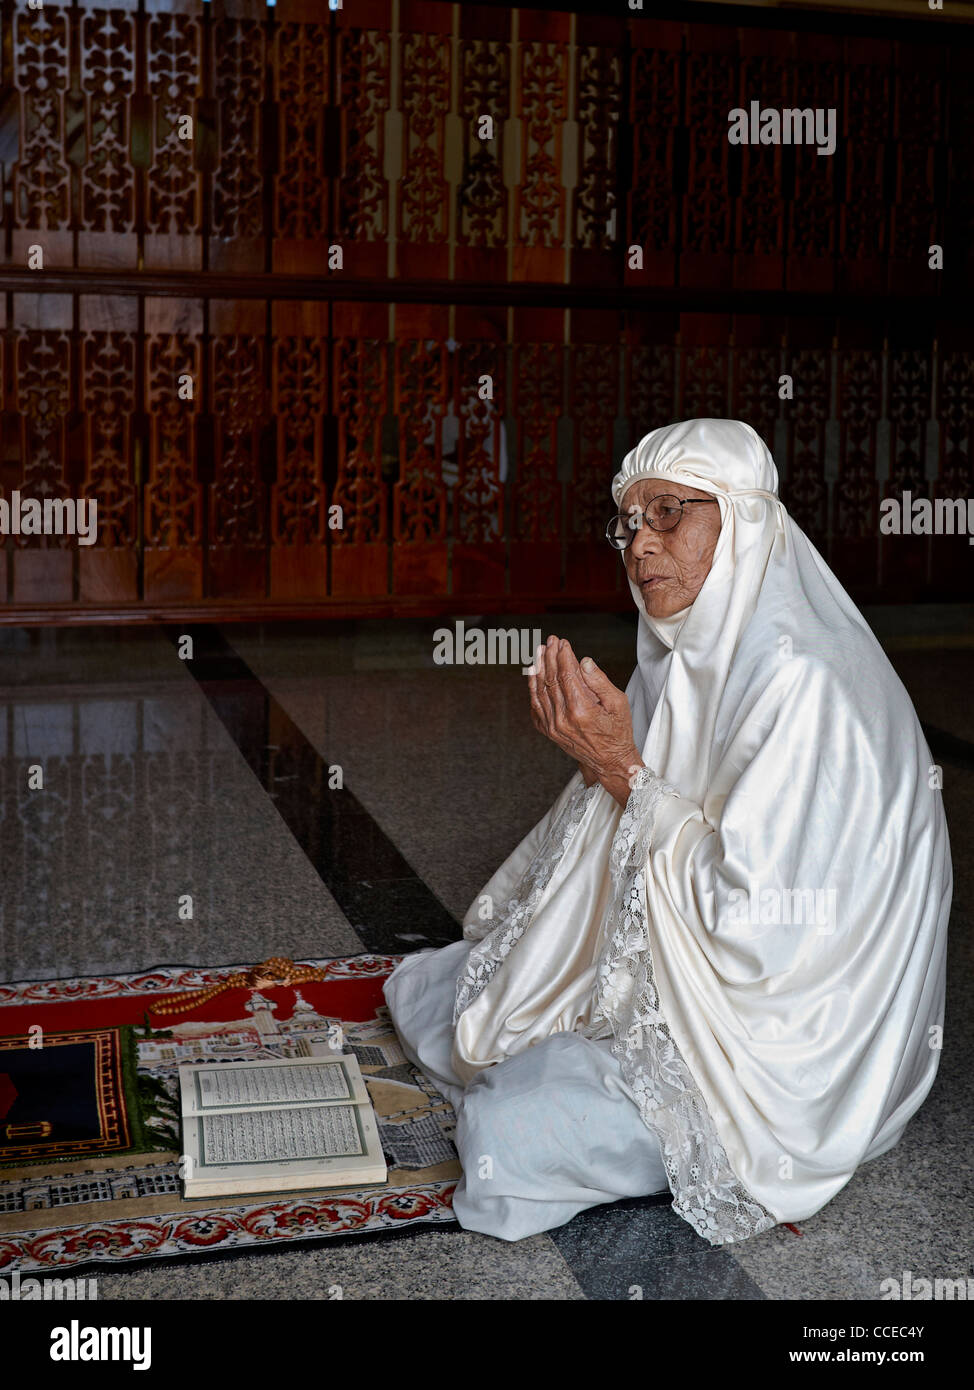 90 year old Muslim woman praying and wearing a white traditional burka Stock Photo